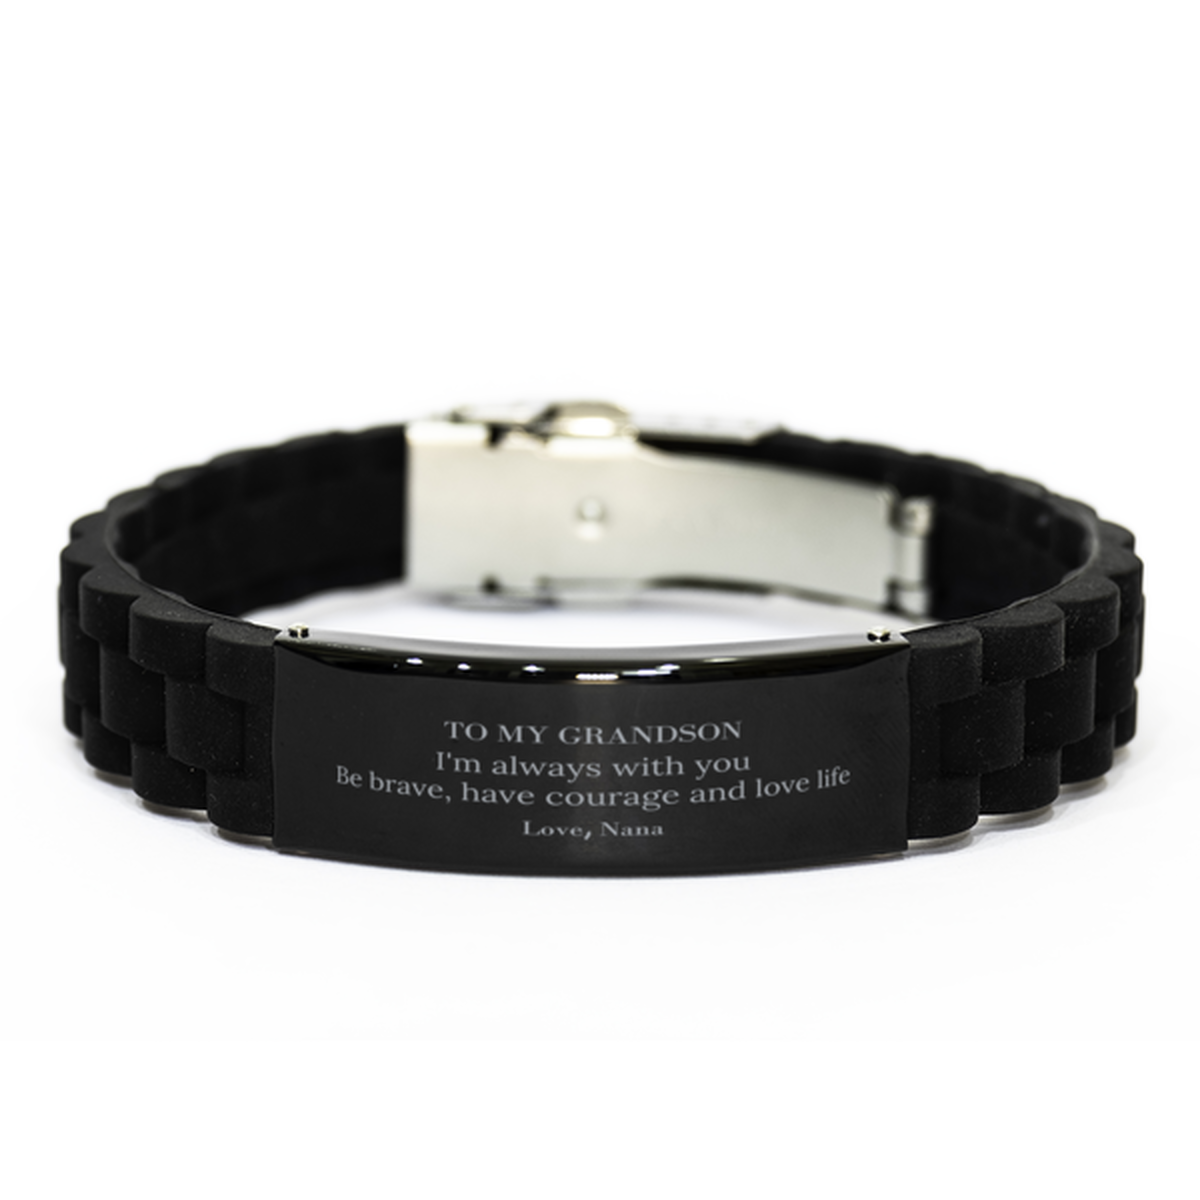 To My Grandson Gifts from Nana, Unique Black Glidelock Clasp Bracelet Inspirational Christmas Birthday Graduation Gifts for Grandson I'm always with you. Be brave, have courage and love life. Love, Nana